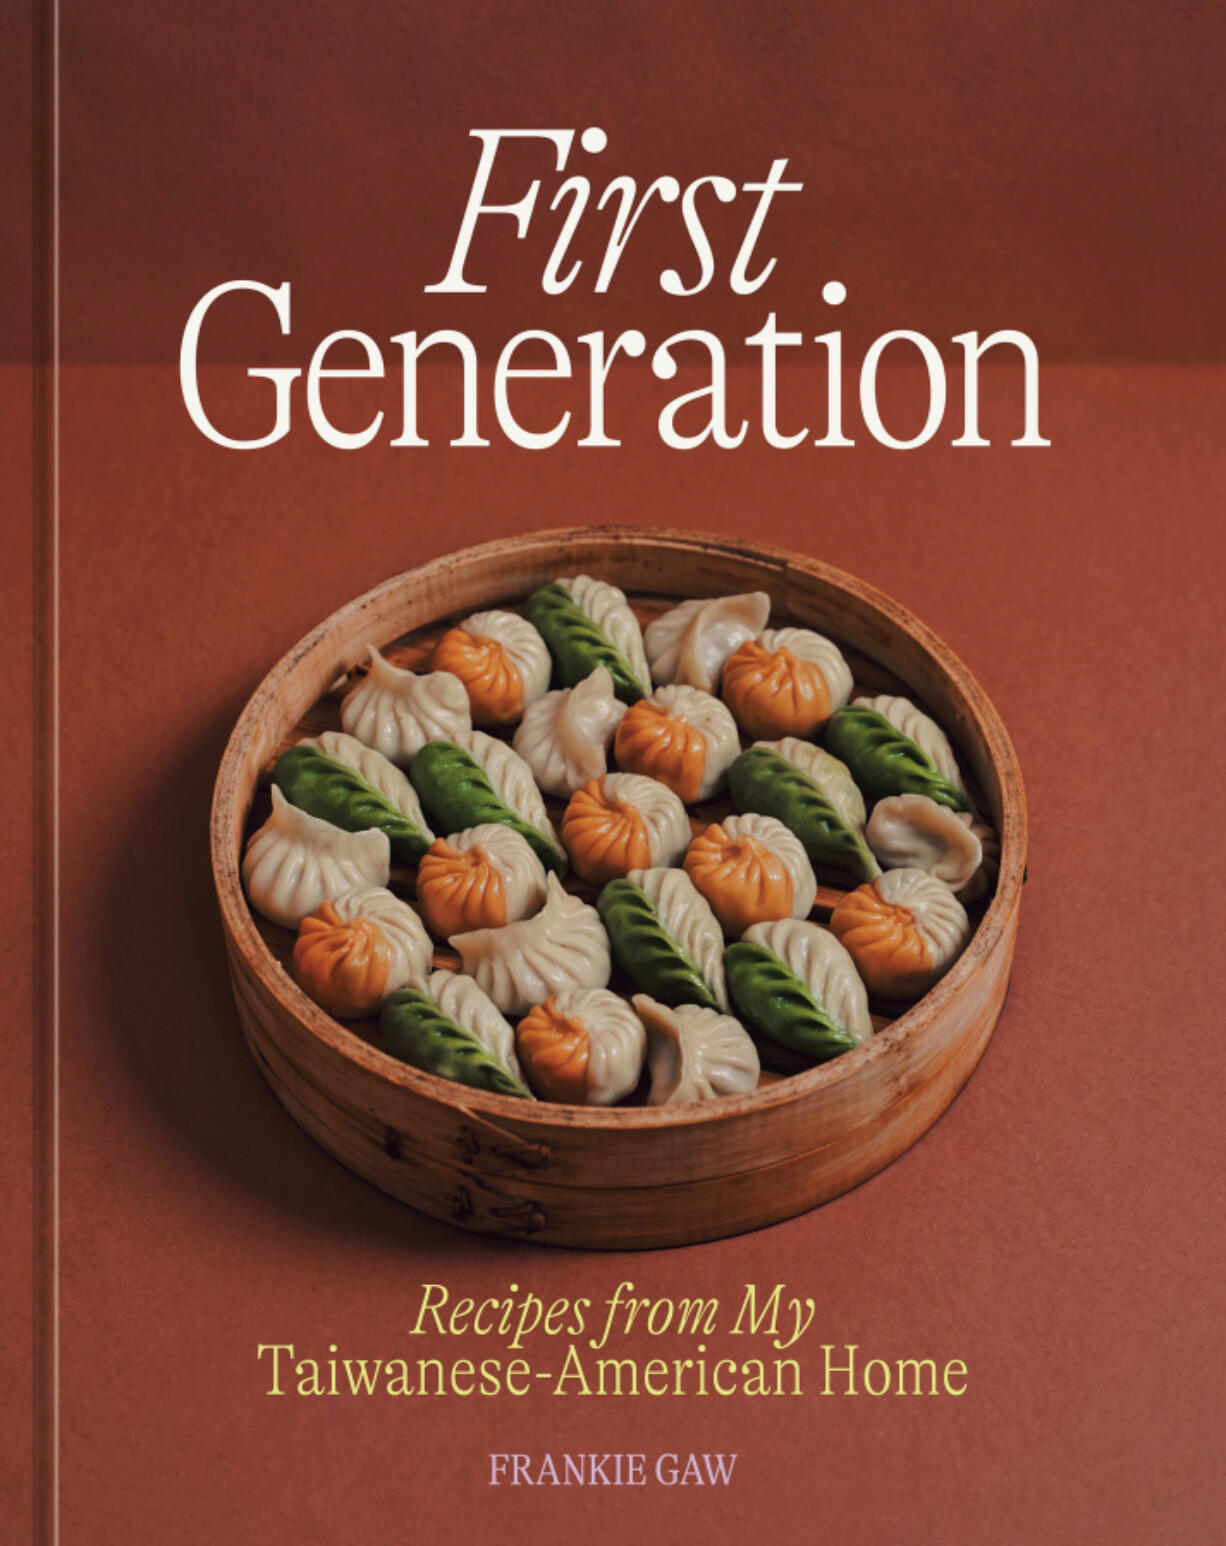 "First Generation: Recipes from my Taiwanese-American Home" by Frankie Gaw  (Penquin Random House/Ten Speed Press/TNS)